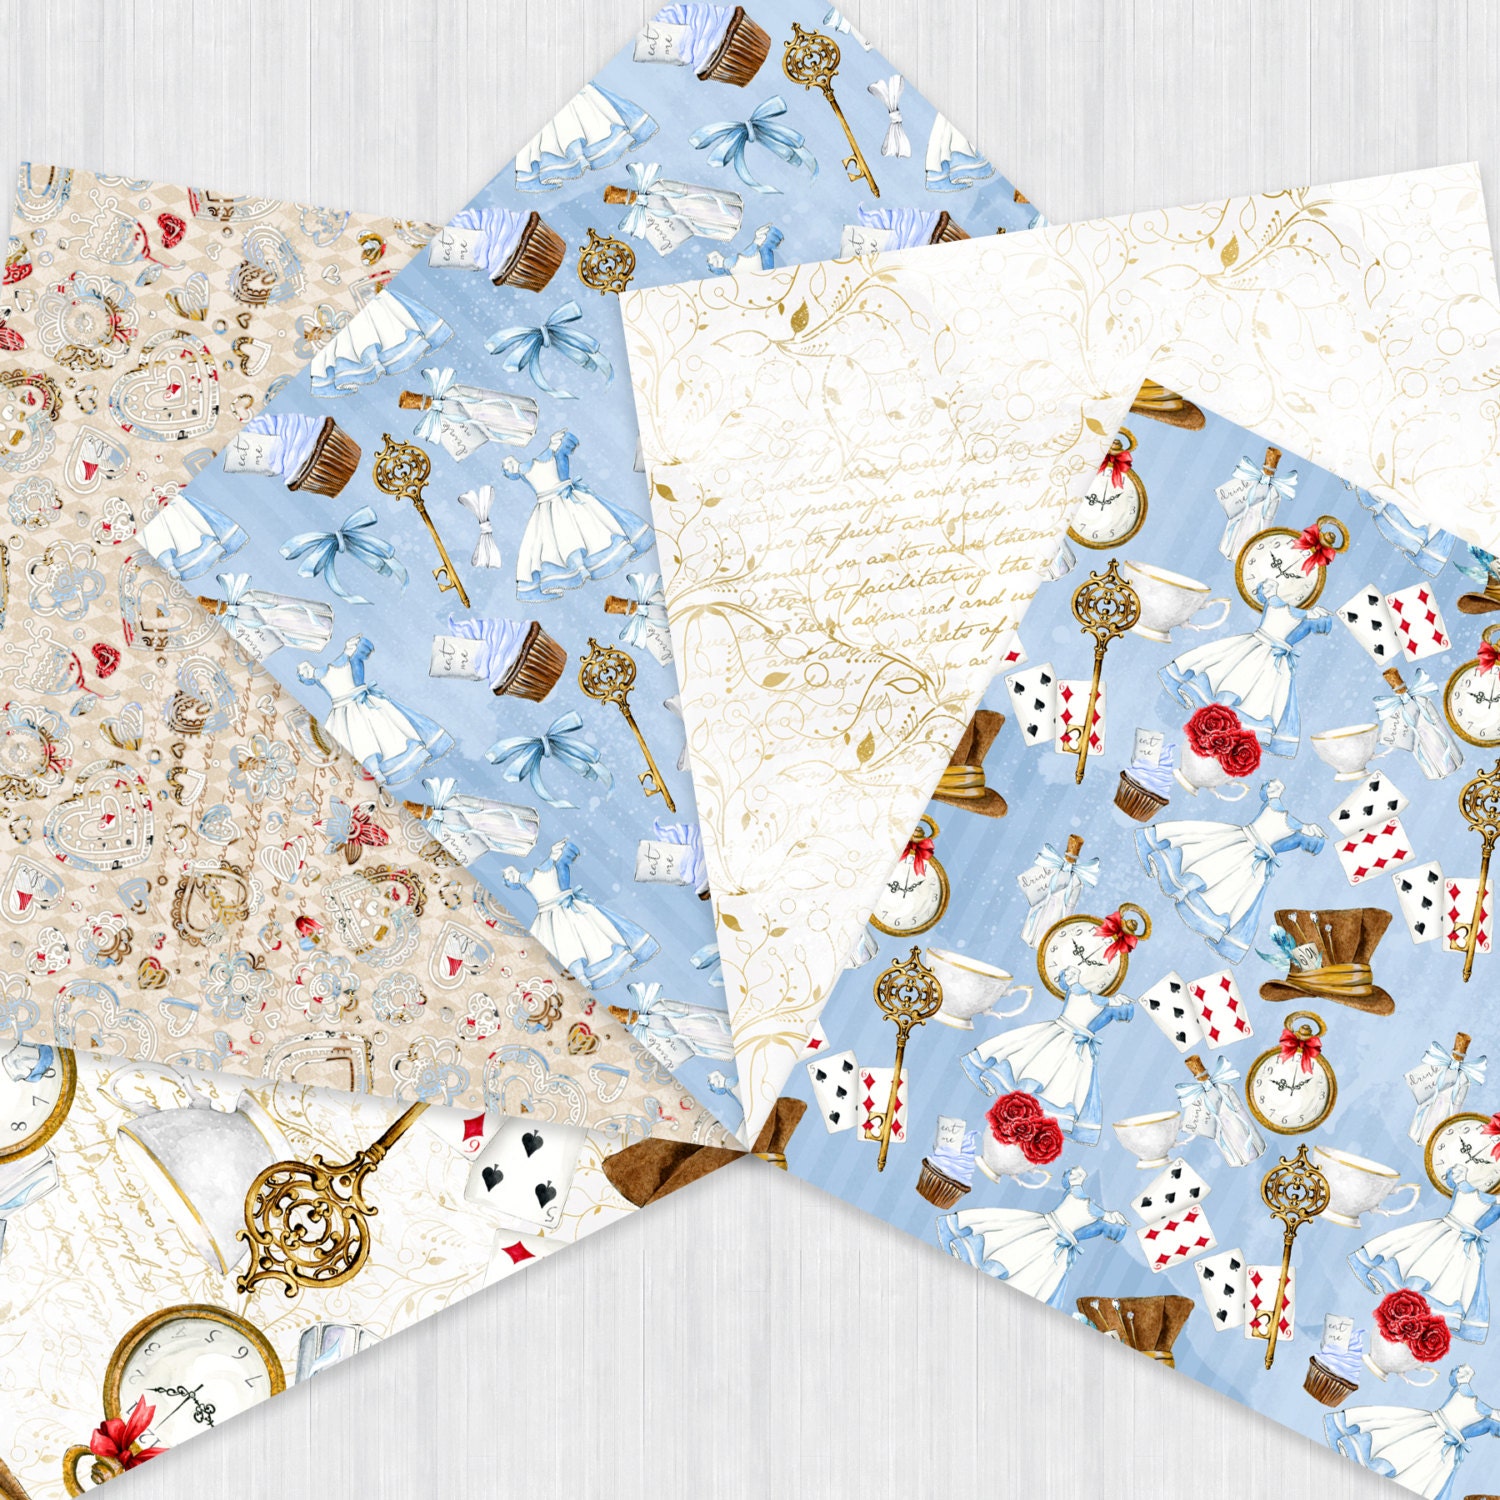 Little Alice Blue - beautiful patterned butter paper / wrapping